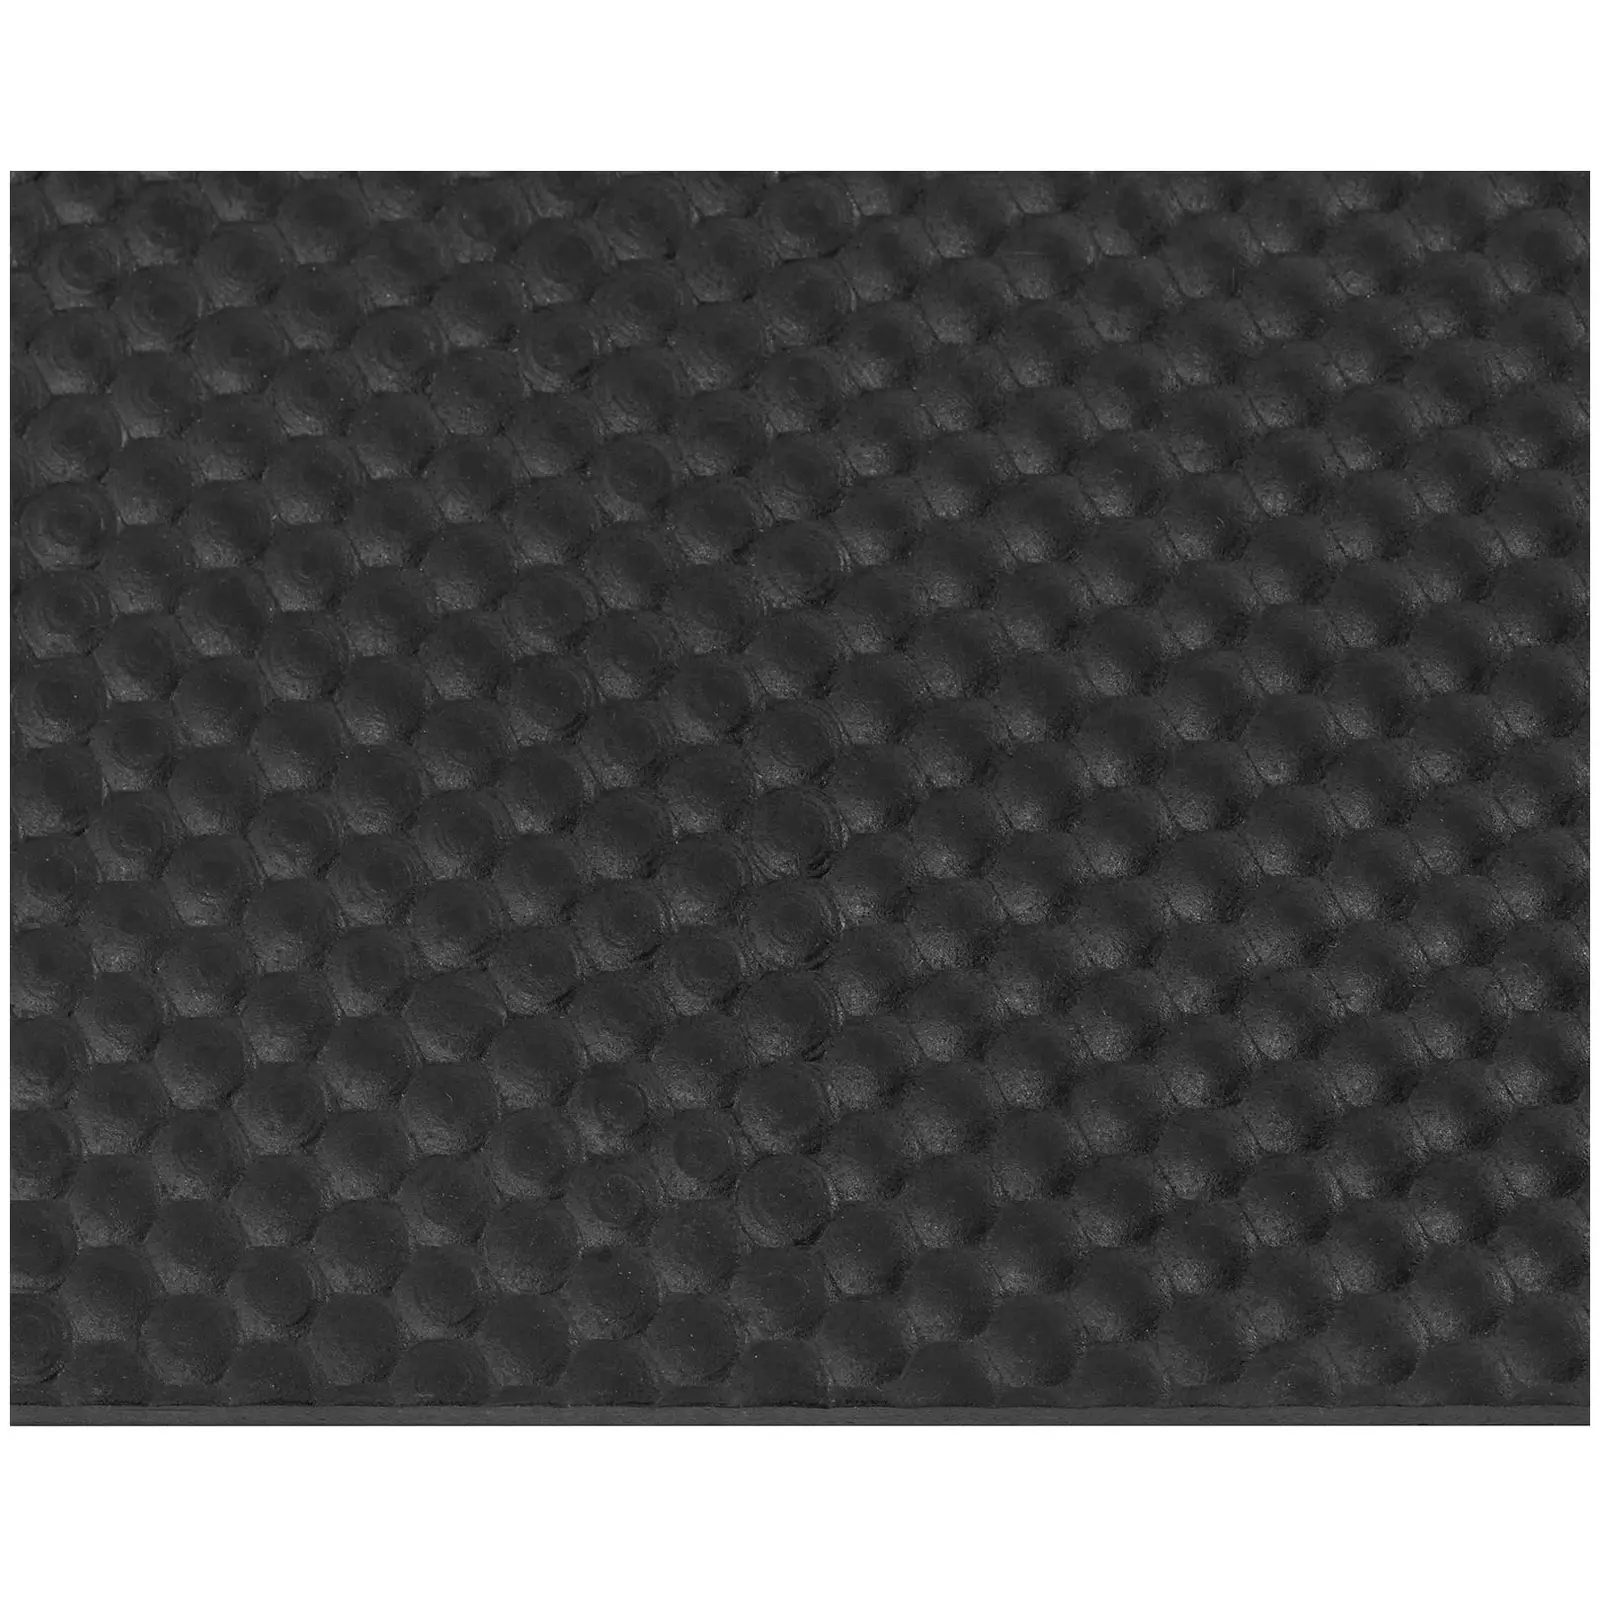 Stable Mats - set of 5 - with drainage grooves - 1830 x 1220 mm - 11.15 m²